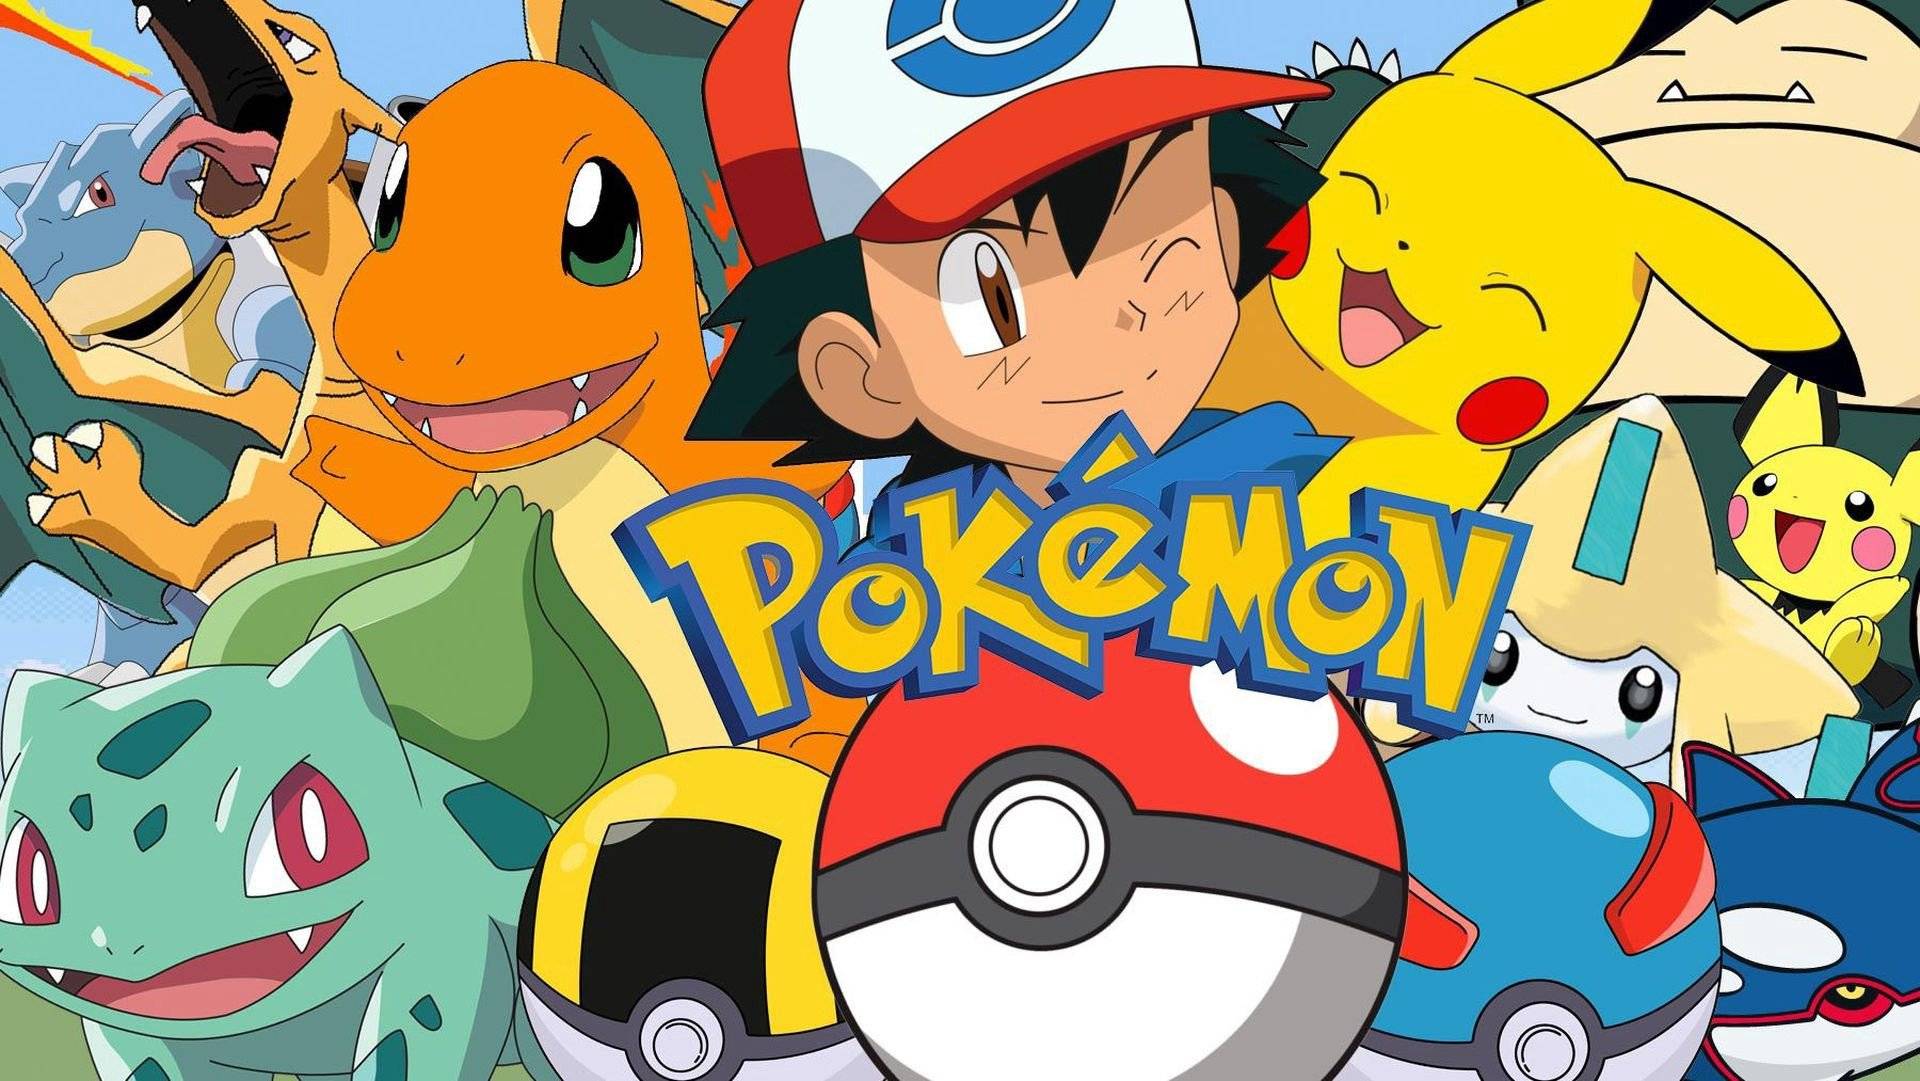 Pokémon 2019 Press Conference: a summary of all announcements